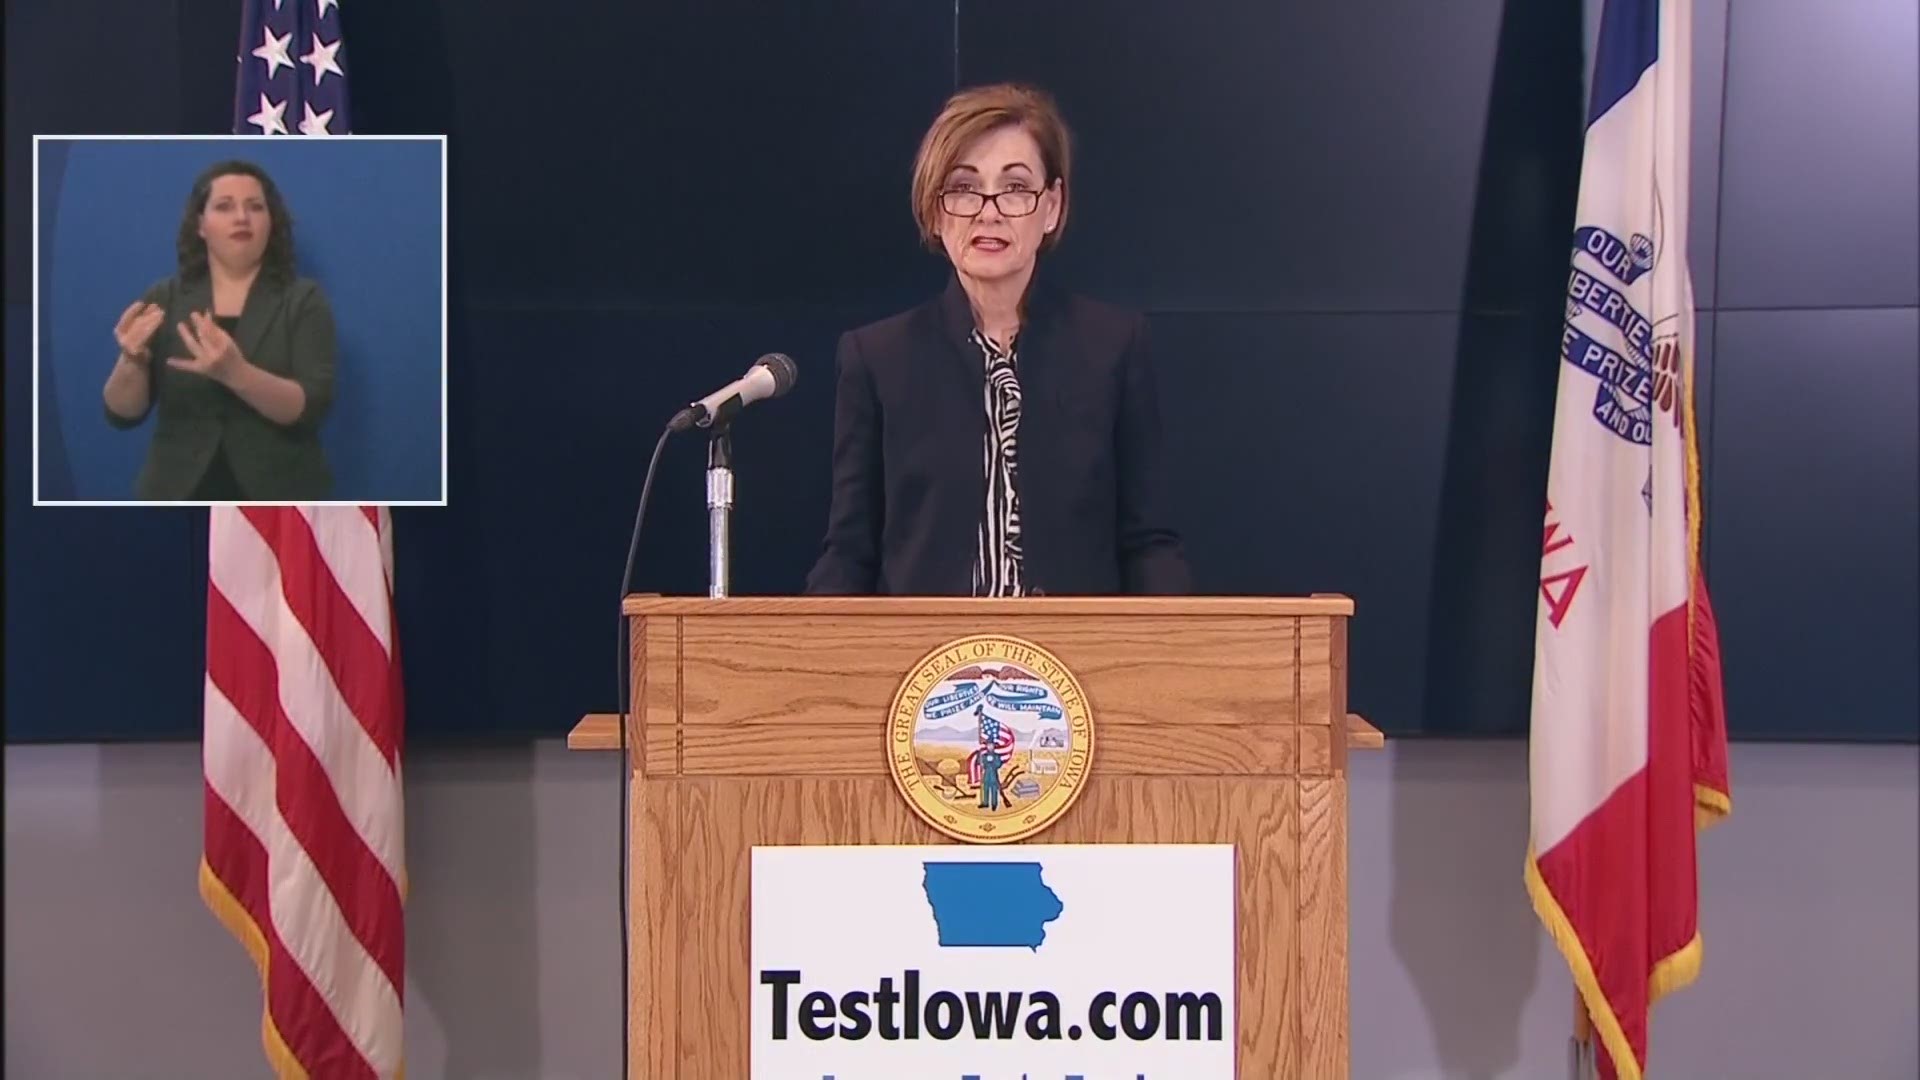 The state of Iowa paid $26 million for the mass testing initiative